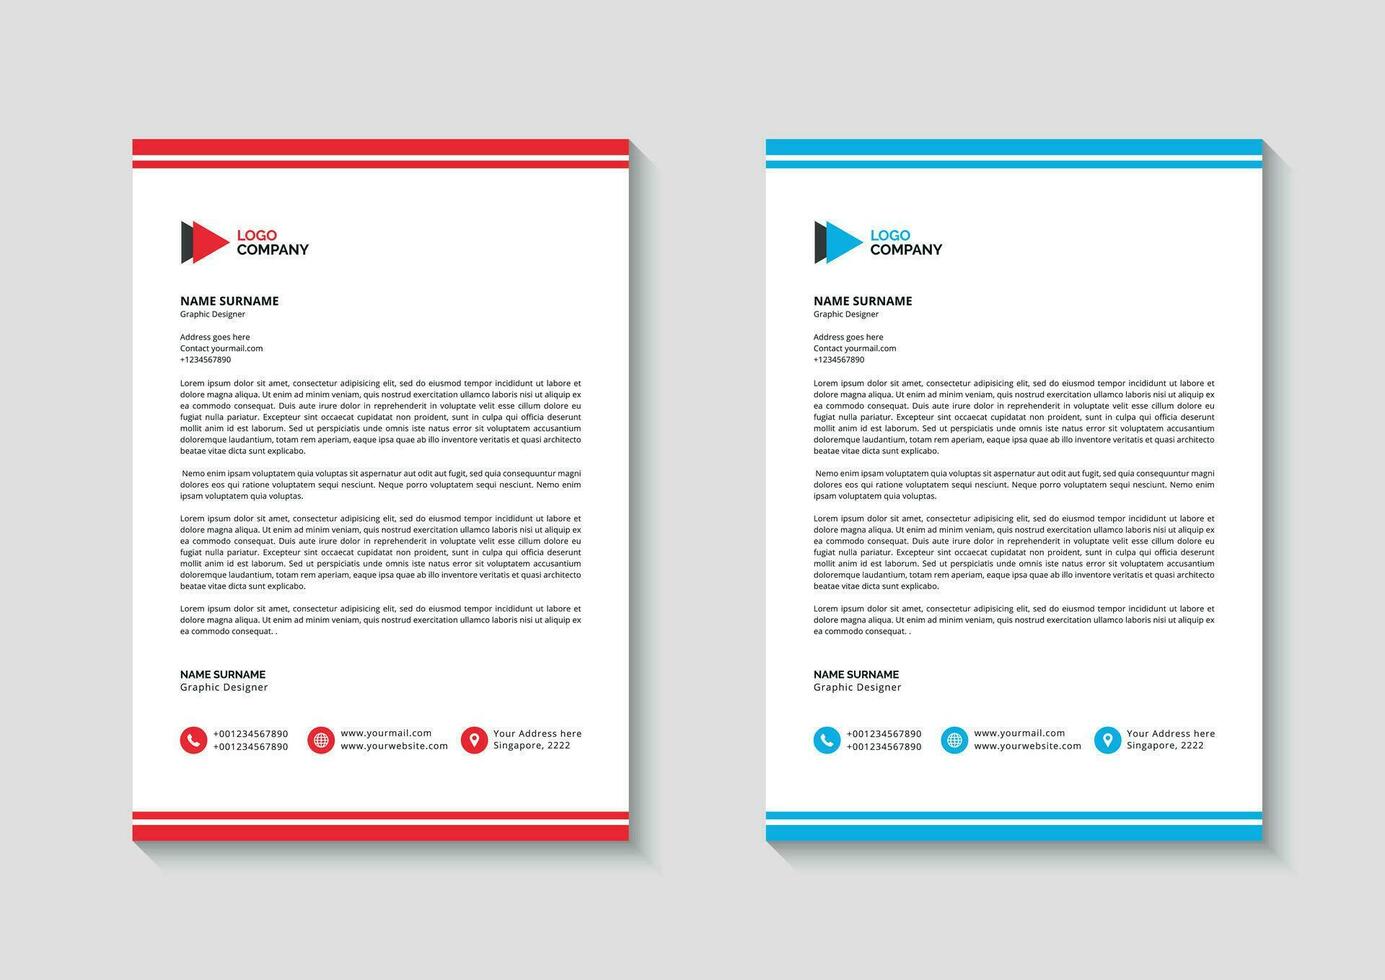 Business letterhead templates with various colors, Creative modern letterhead templates for your project. vector